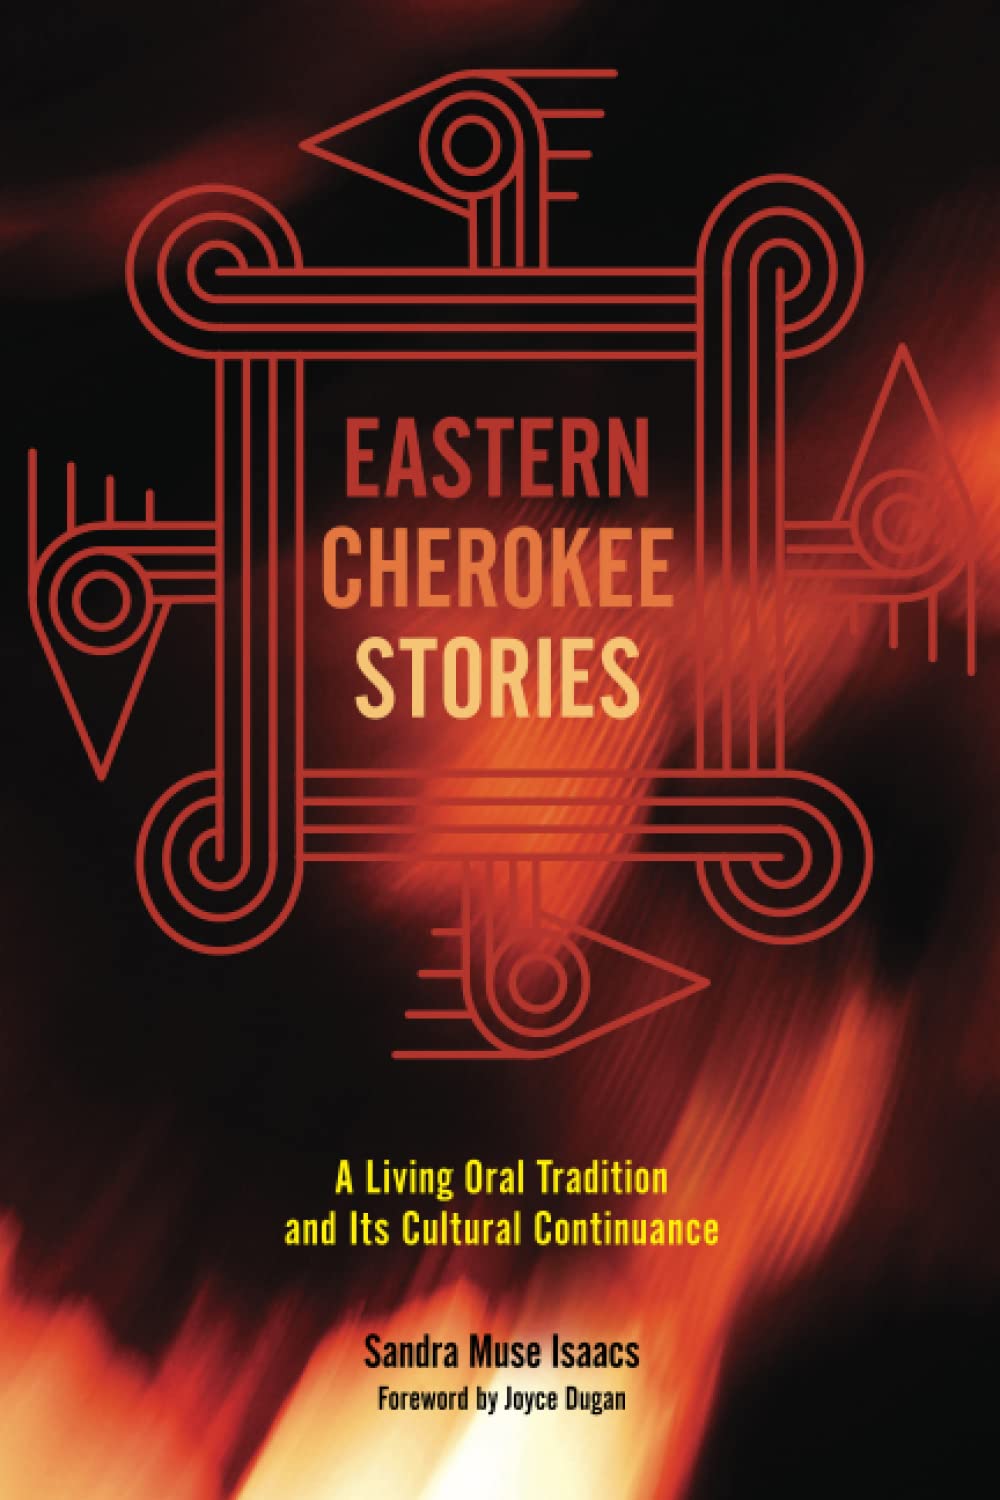 Eastern Cherokee Stories: A Living Oral Tradition and Its Cultural Continuance